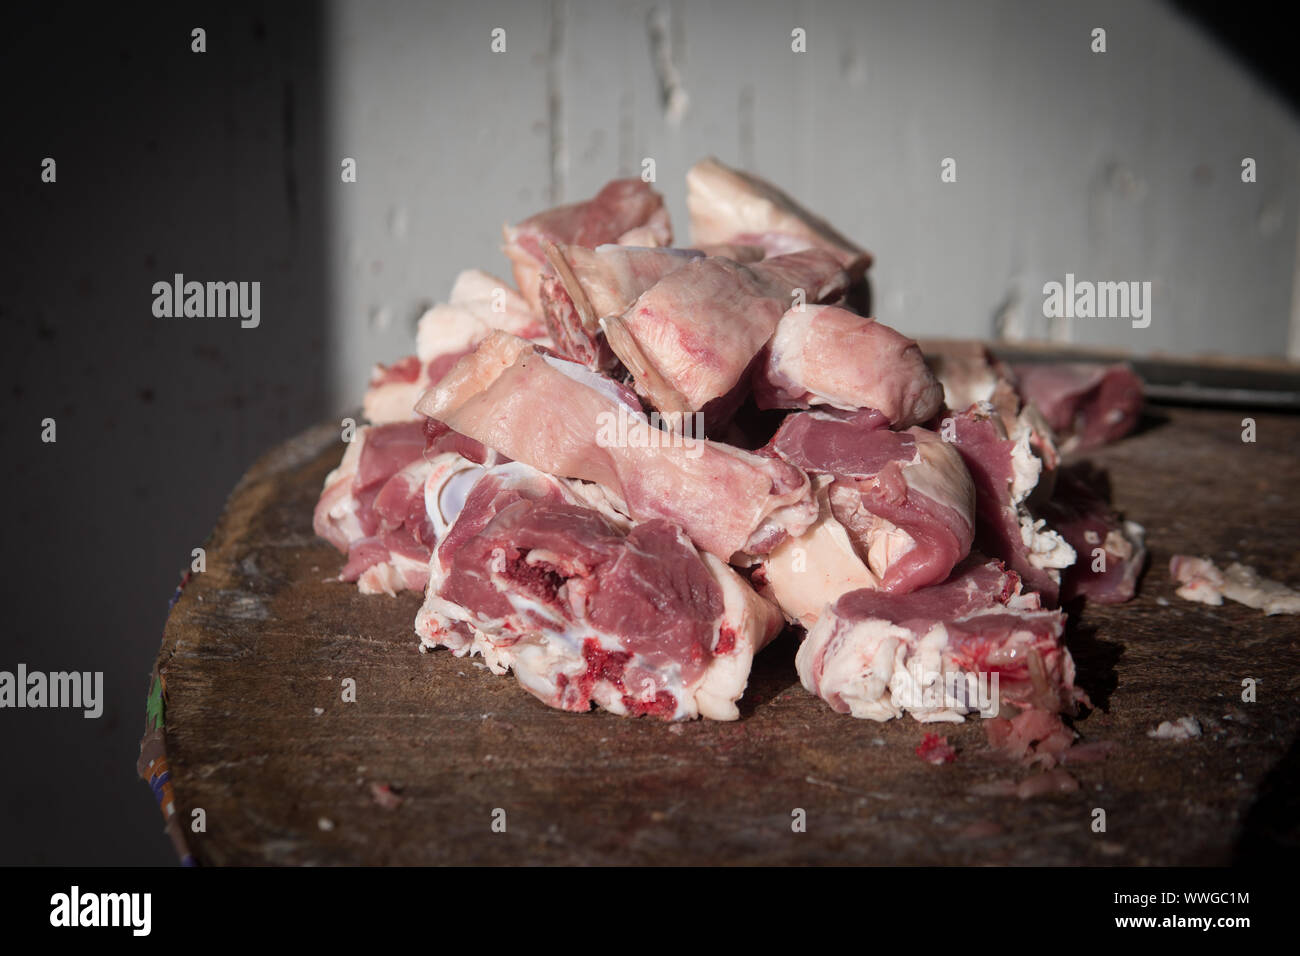 Meat or butcher shop at vintage or old market. Fresh meat on wooden stump. Stock Photo